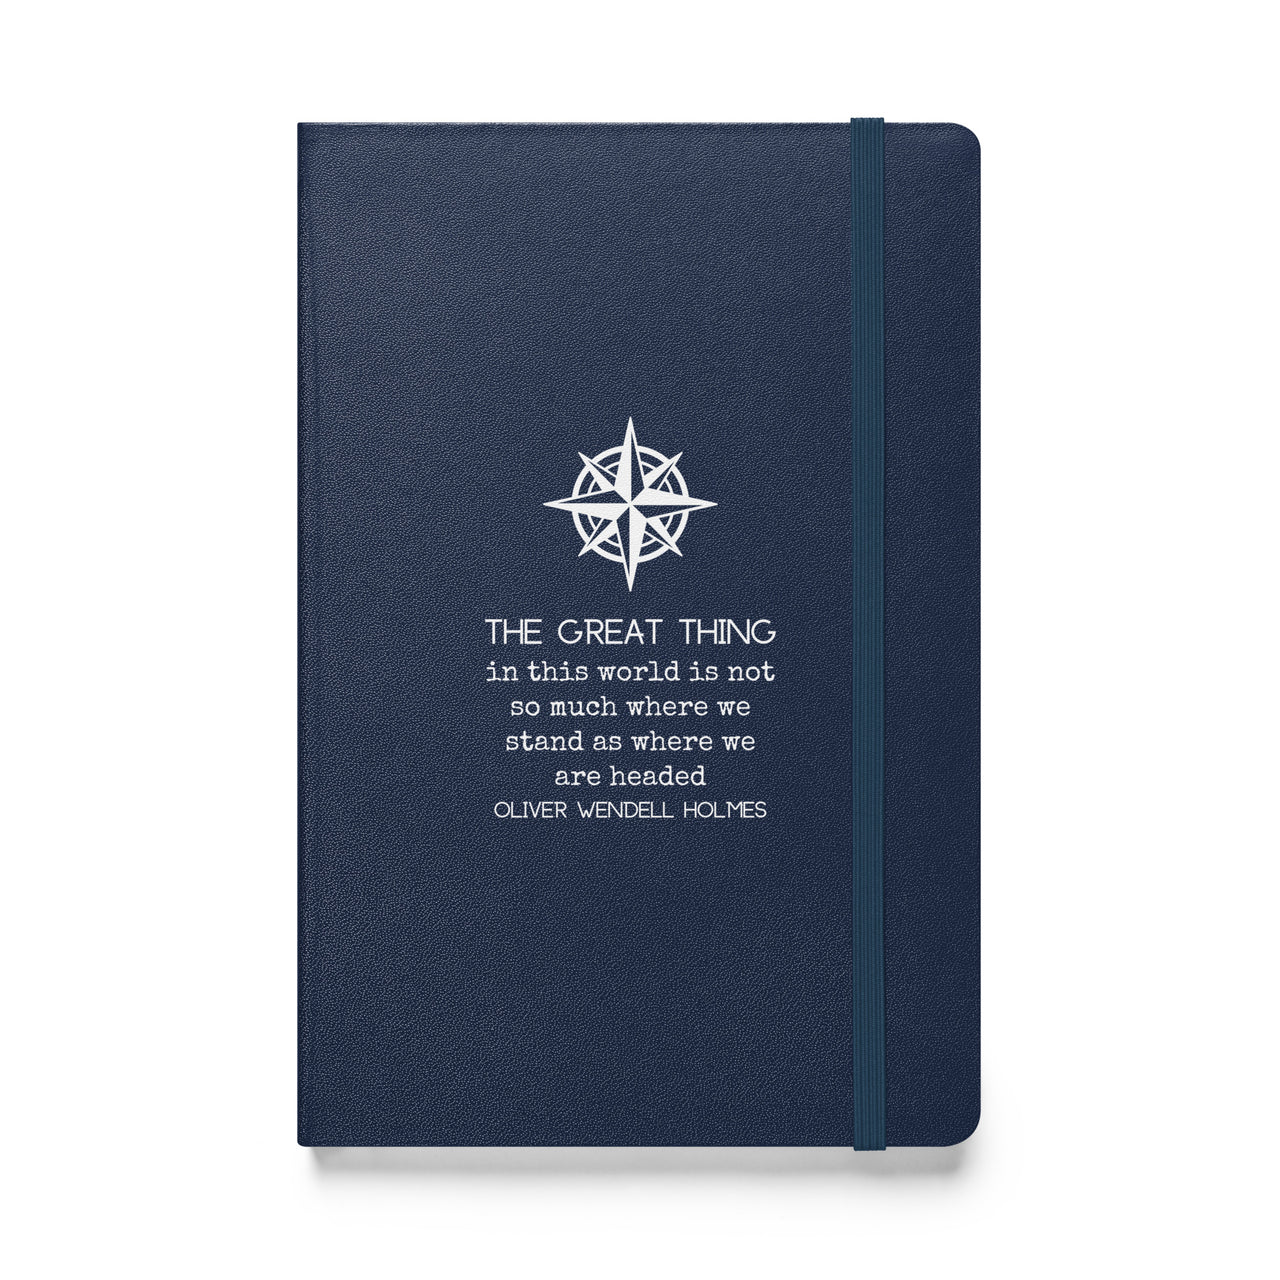 Compass Rose Journal, Hardcover, 5.5" x 8.5"  New England Trading Co Default Title  